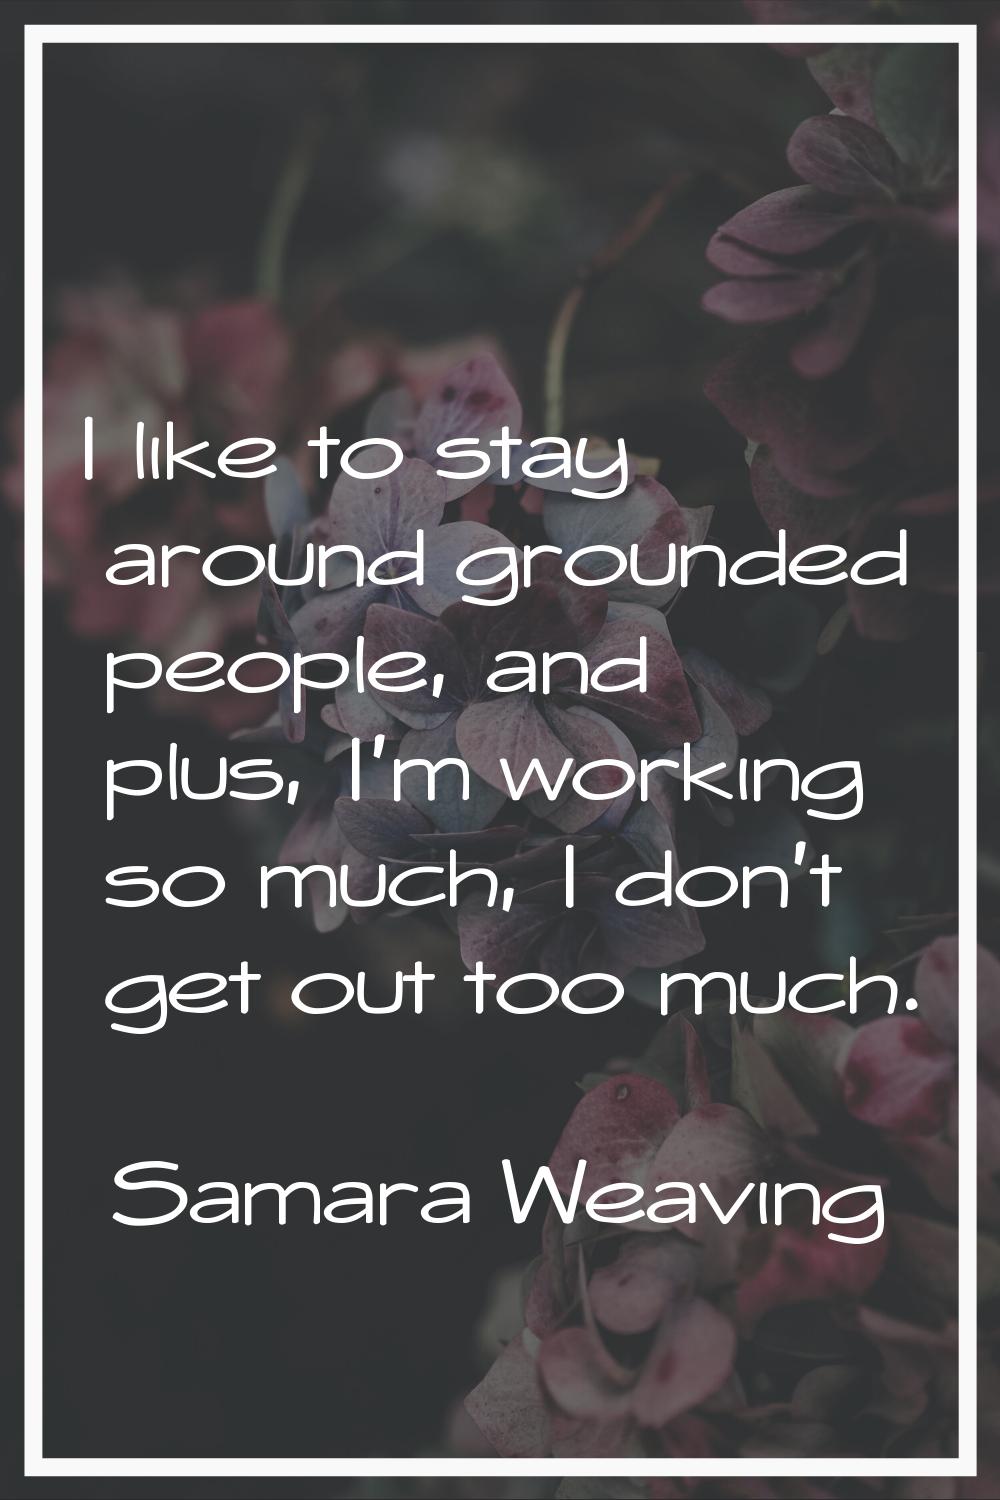 I like to stay around grounded people, and plus, I'm working so much, I don't get out too much.